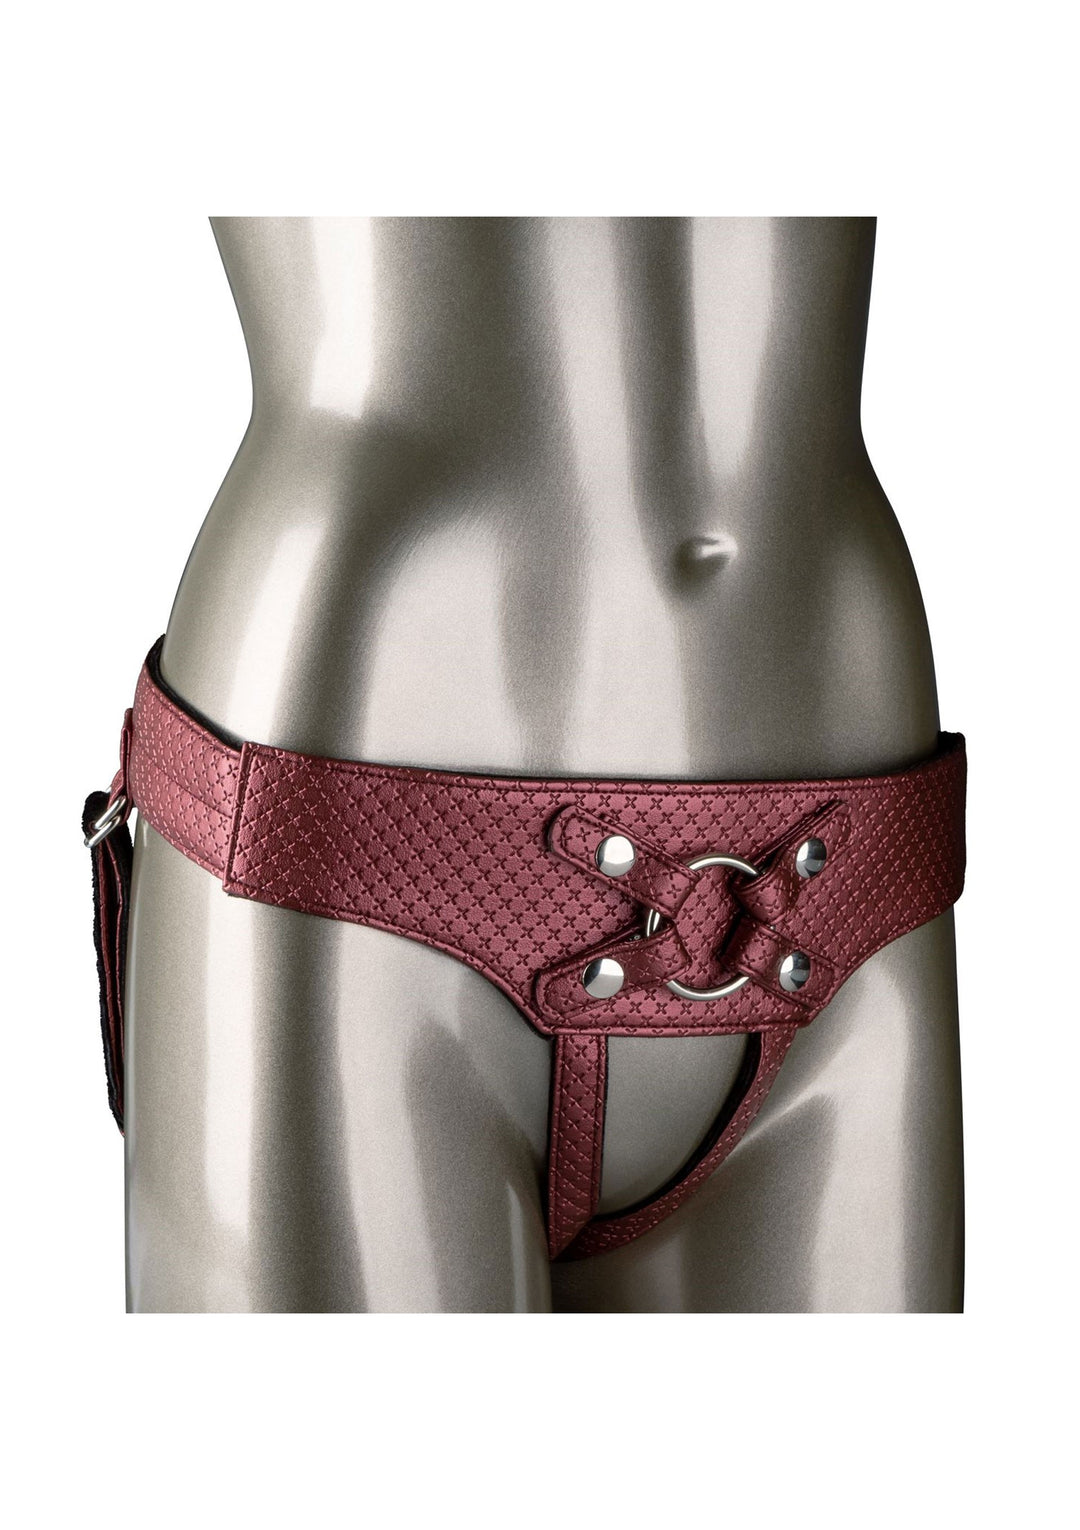 Wearable strap on harness for dildo